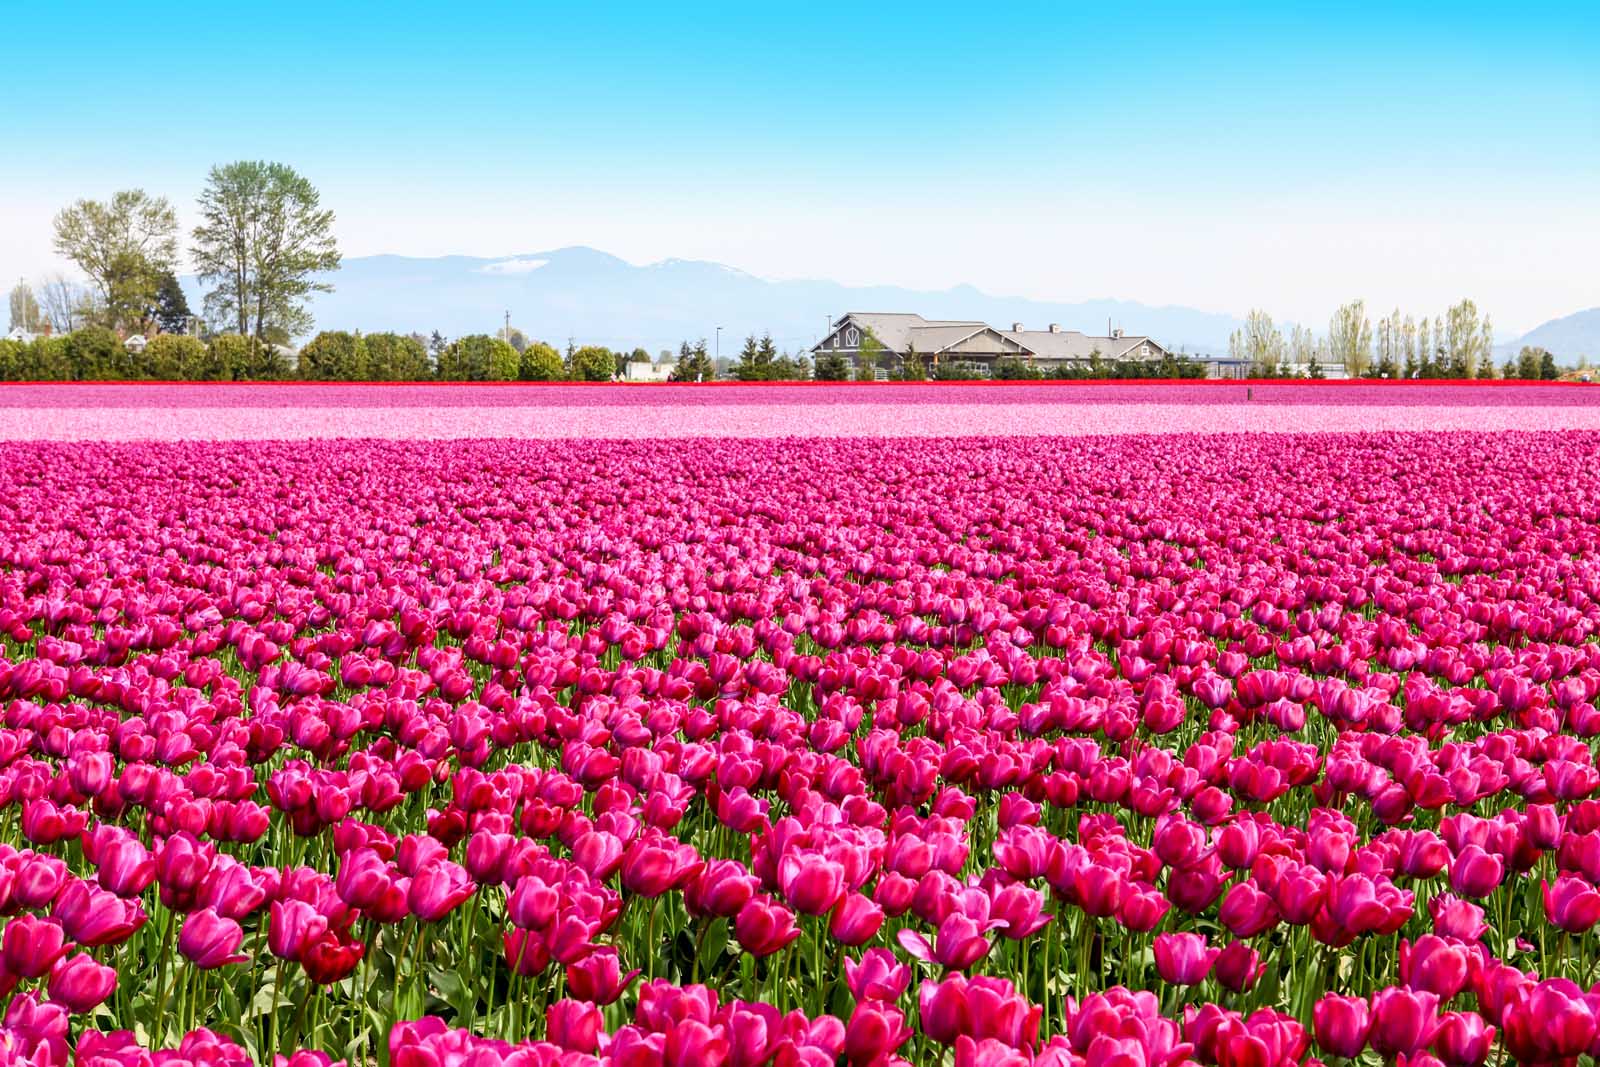 Cool Places to visit in April USA Skagit Valley Washington